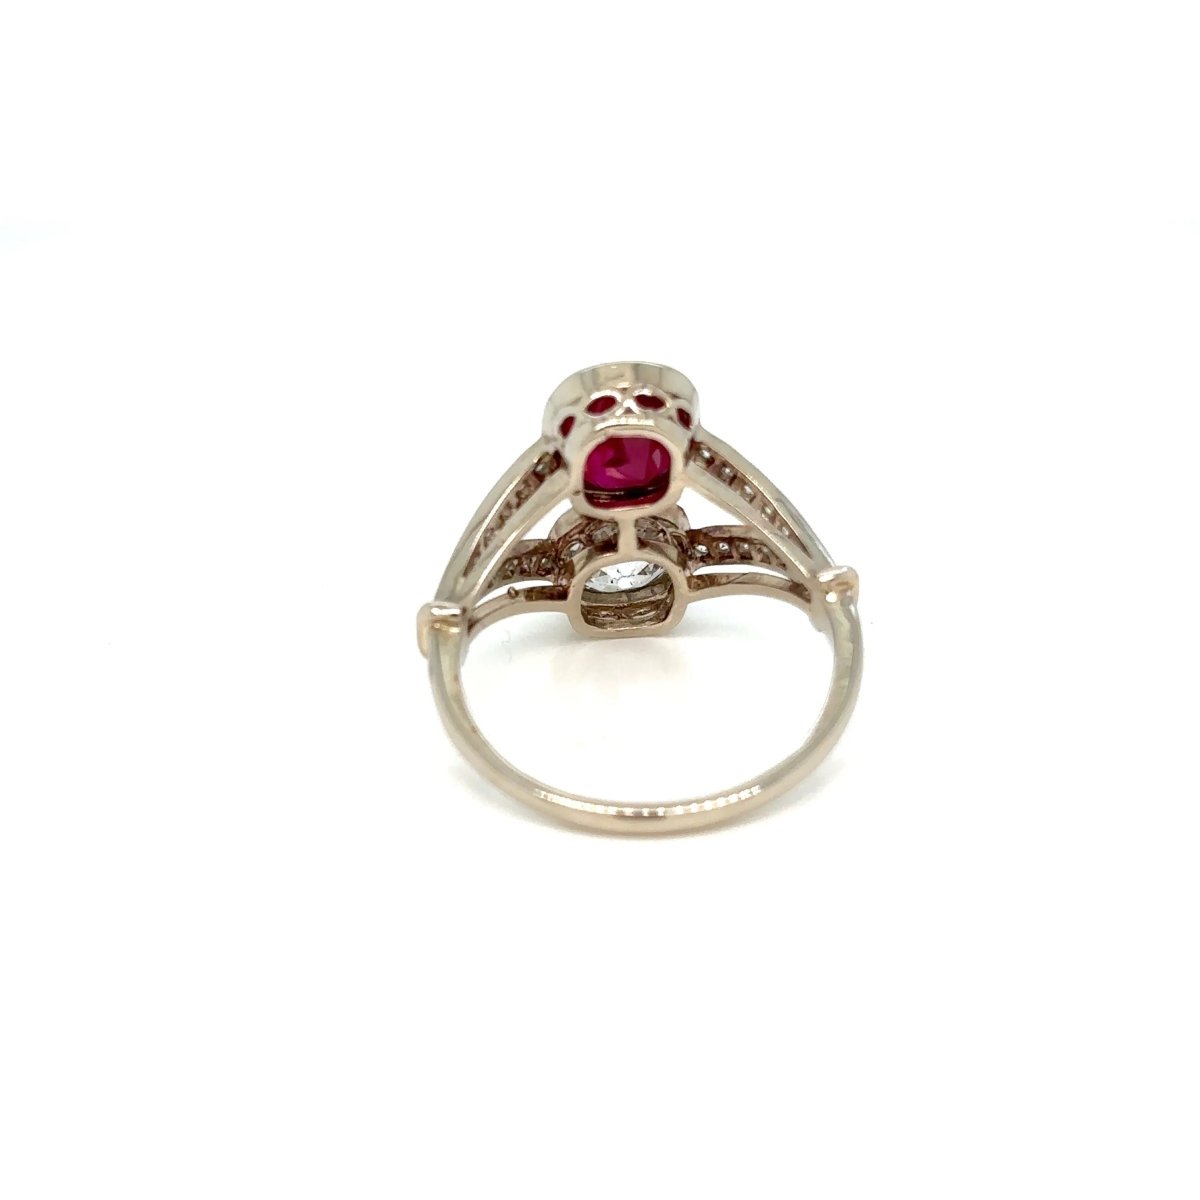 Victorian Certified Natural Unheated Ruby Diamond Vous et Moi Ring - Castafiore